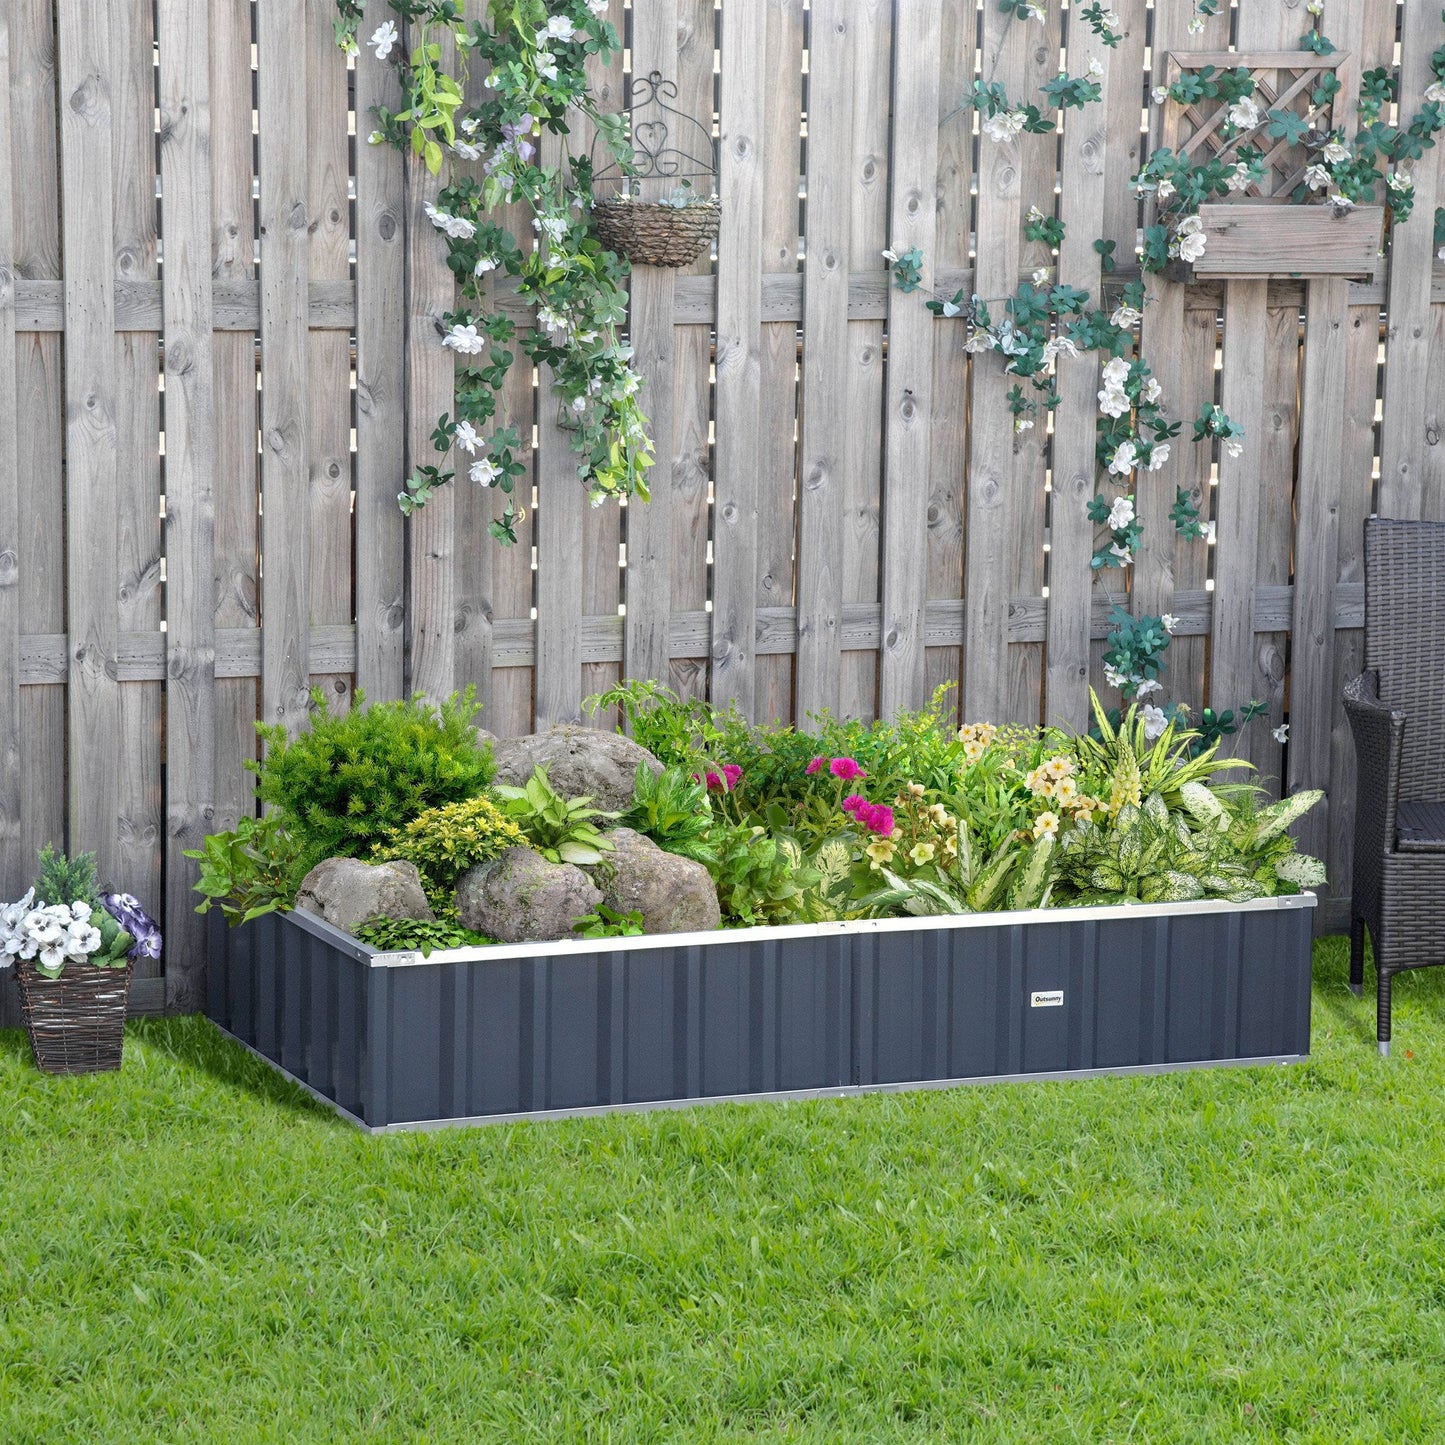 Outdoor and Garden-69'' x 36'' Metal Raised Garden Bed, DIY Large Steel Planter Box, No Bottom w/ A Pairs of Glove for Backyard, Grey - Outdoor Style Company